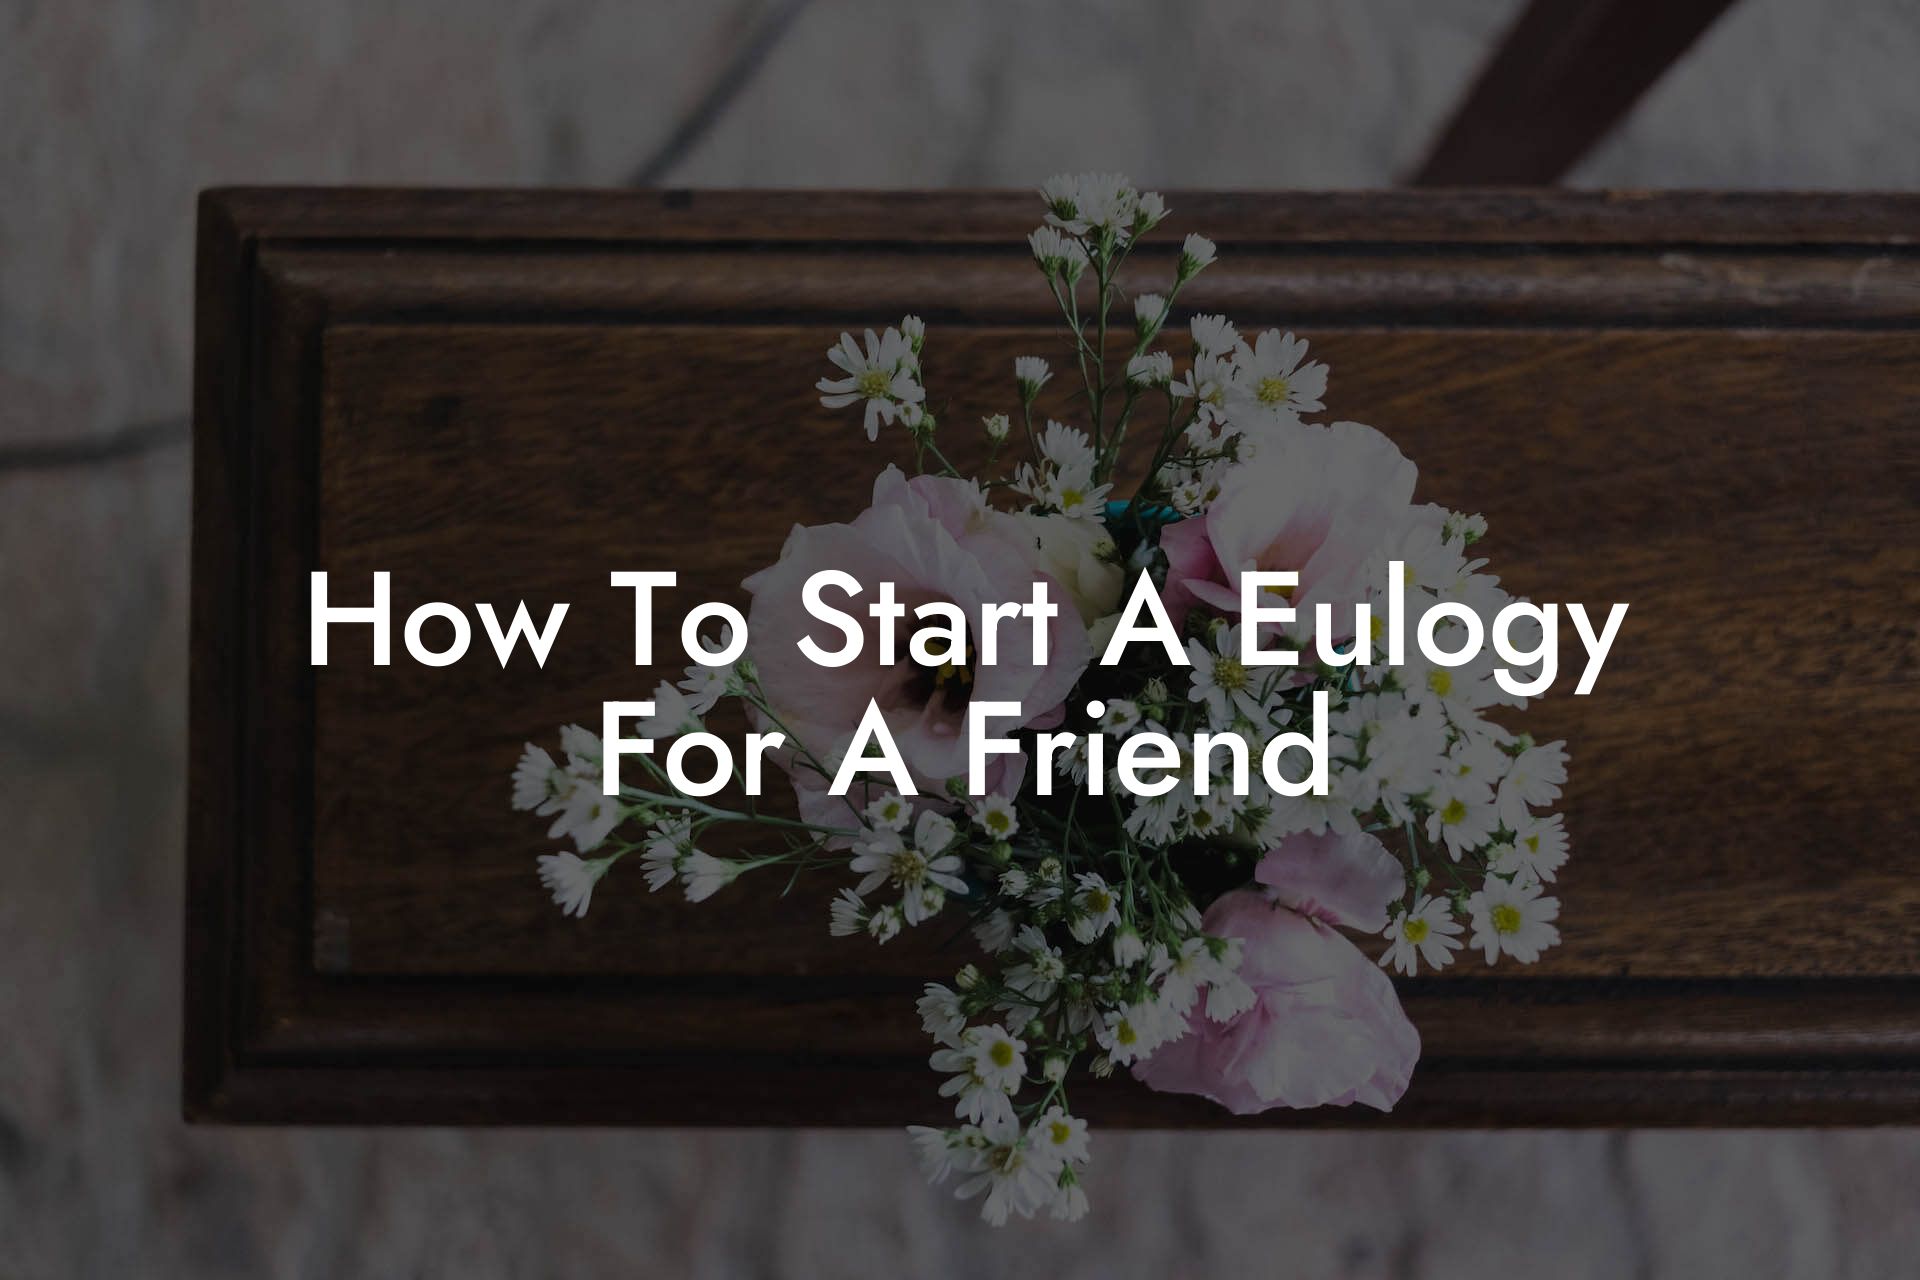 How To Start A Eulogy For A Friend